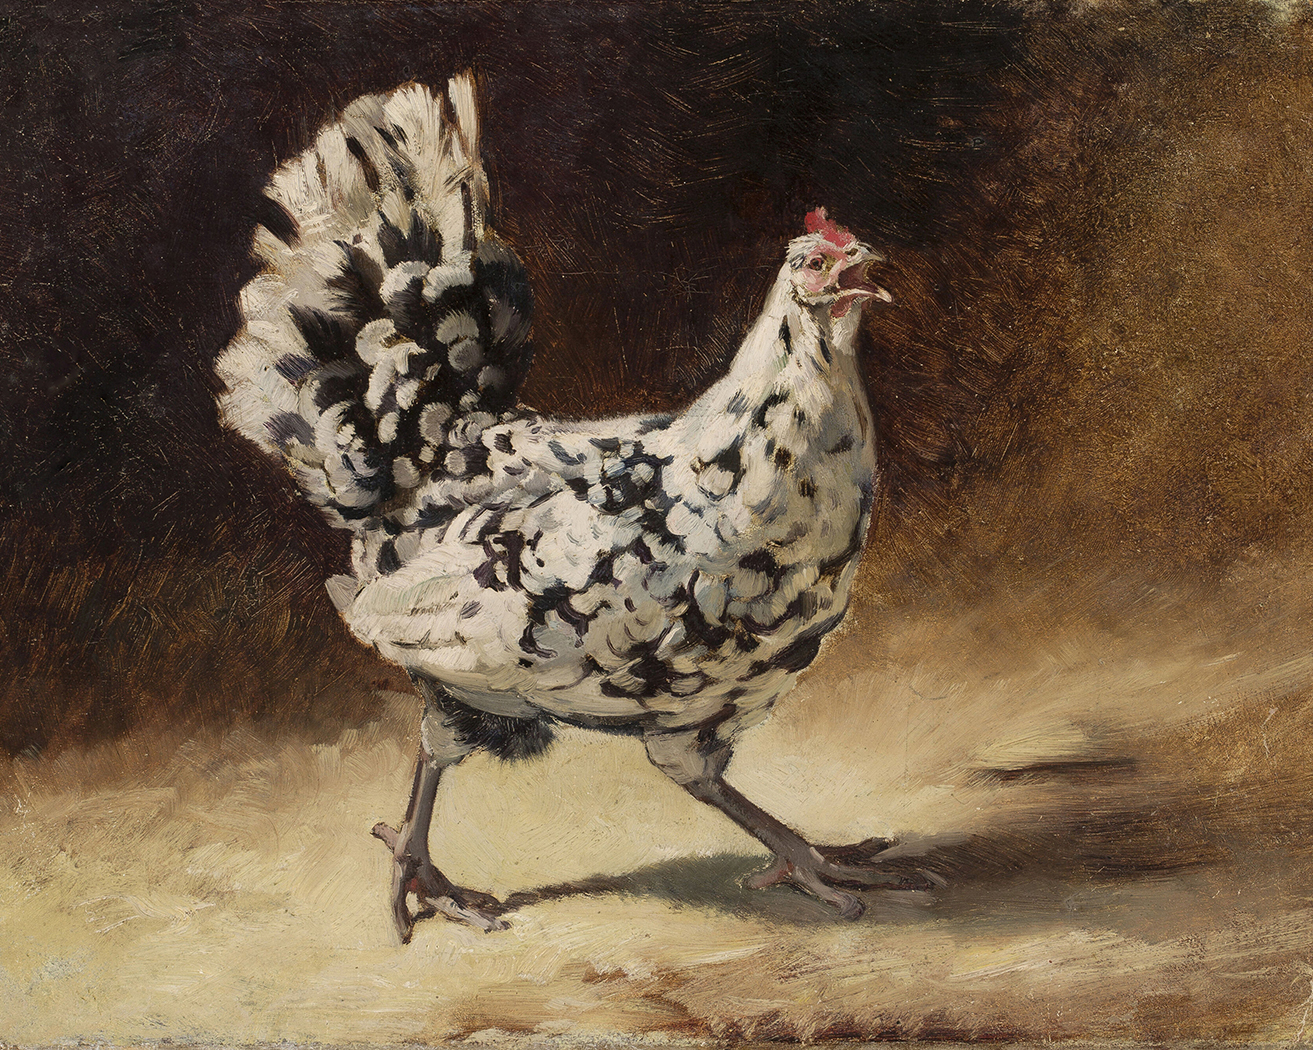 Farm/Pastoral Farm Black and White Chicken Oil Painting P ...